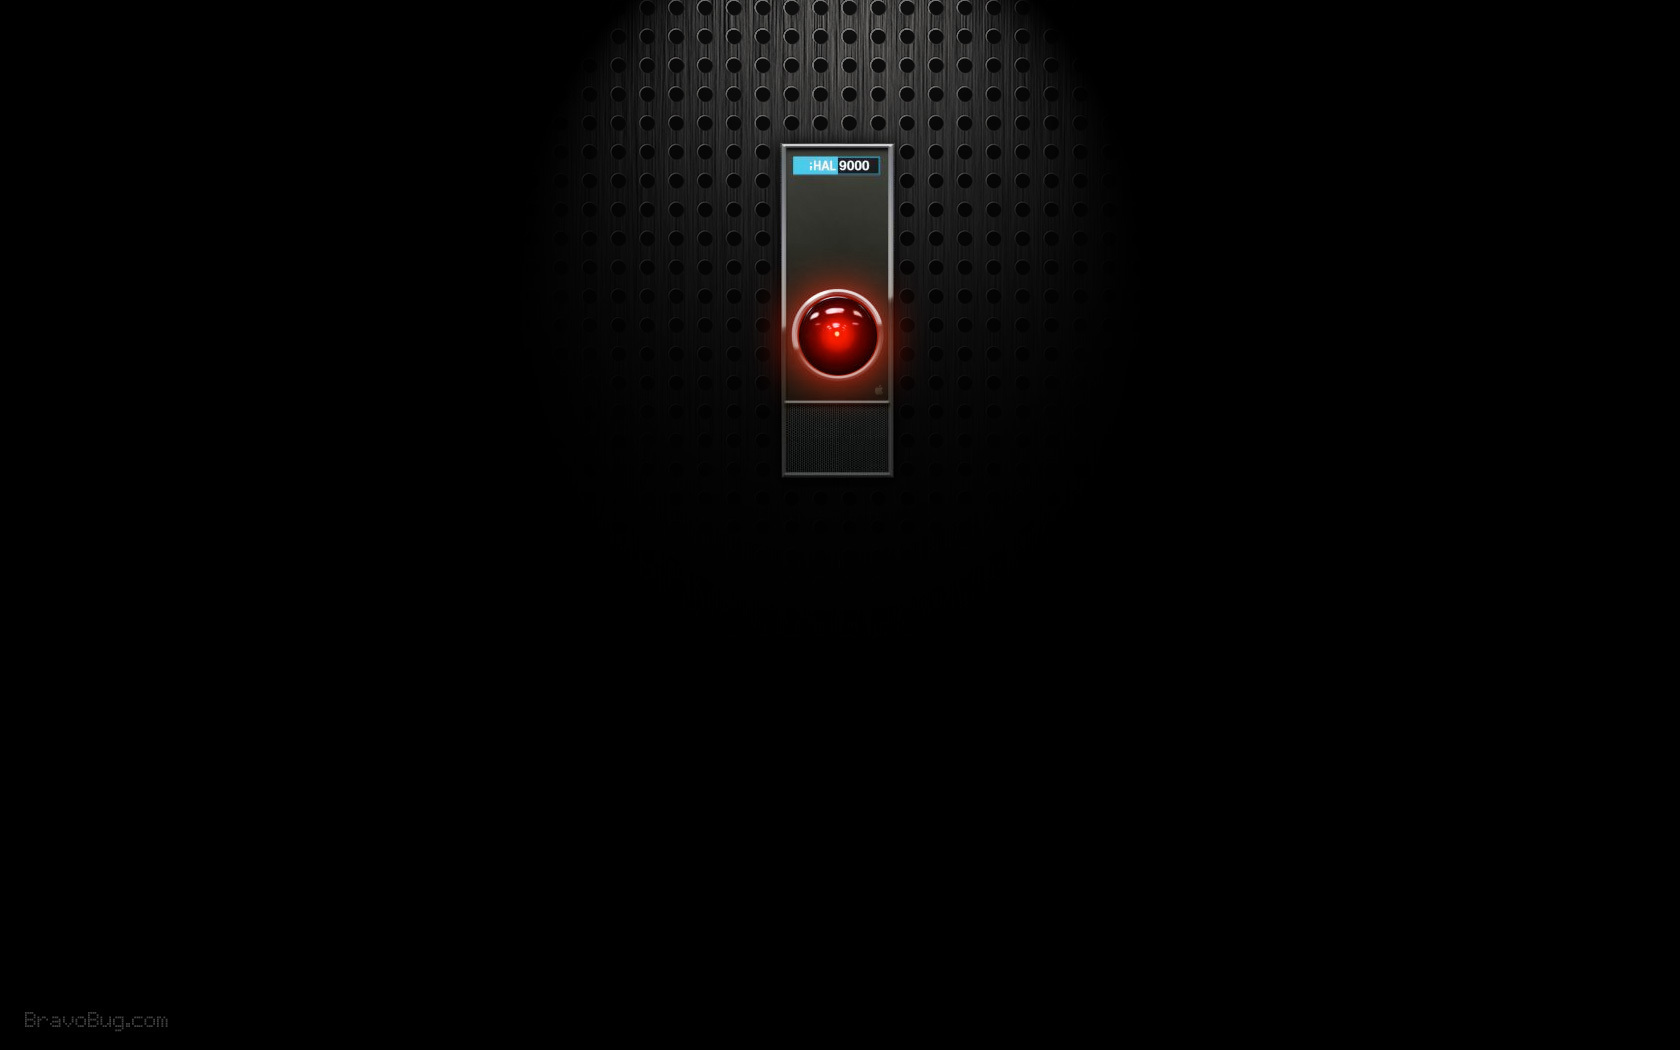 iHal 9000 - designed by 'Ai research'-for Apple - artificial intelligence  Wallpaper (15886799) - Fanpop